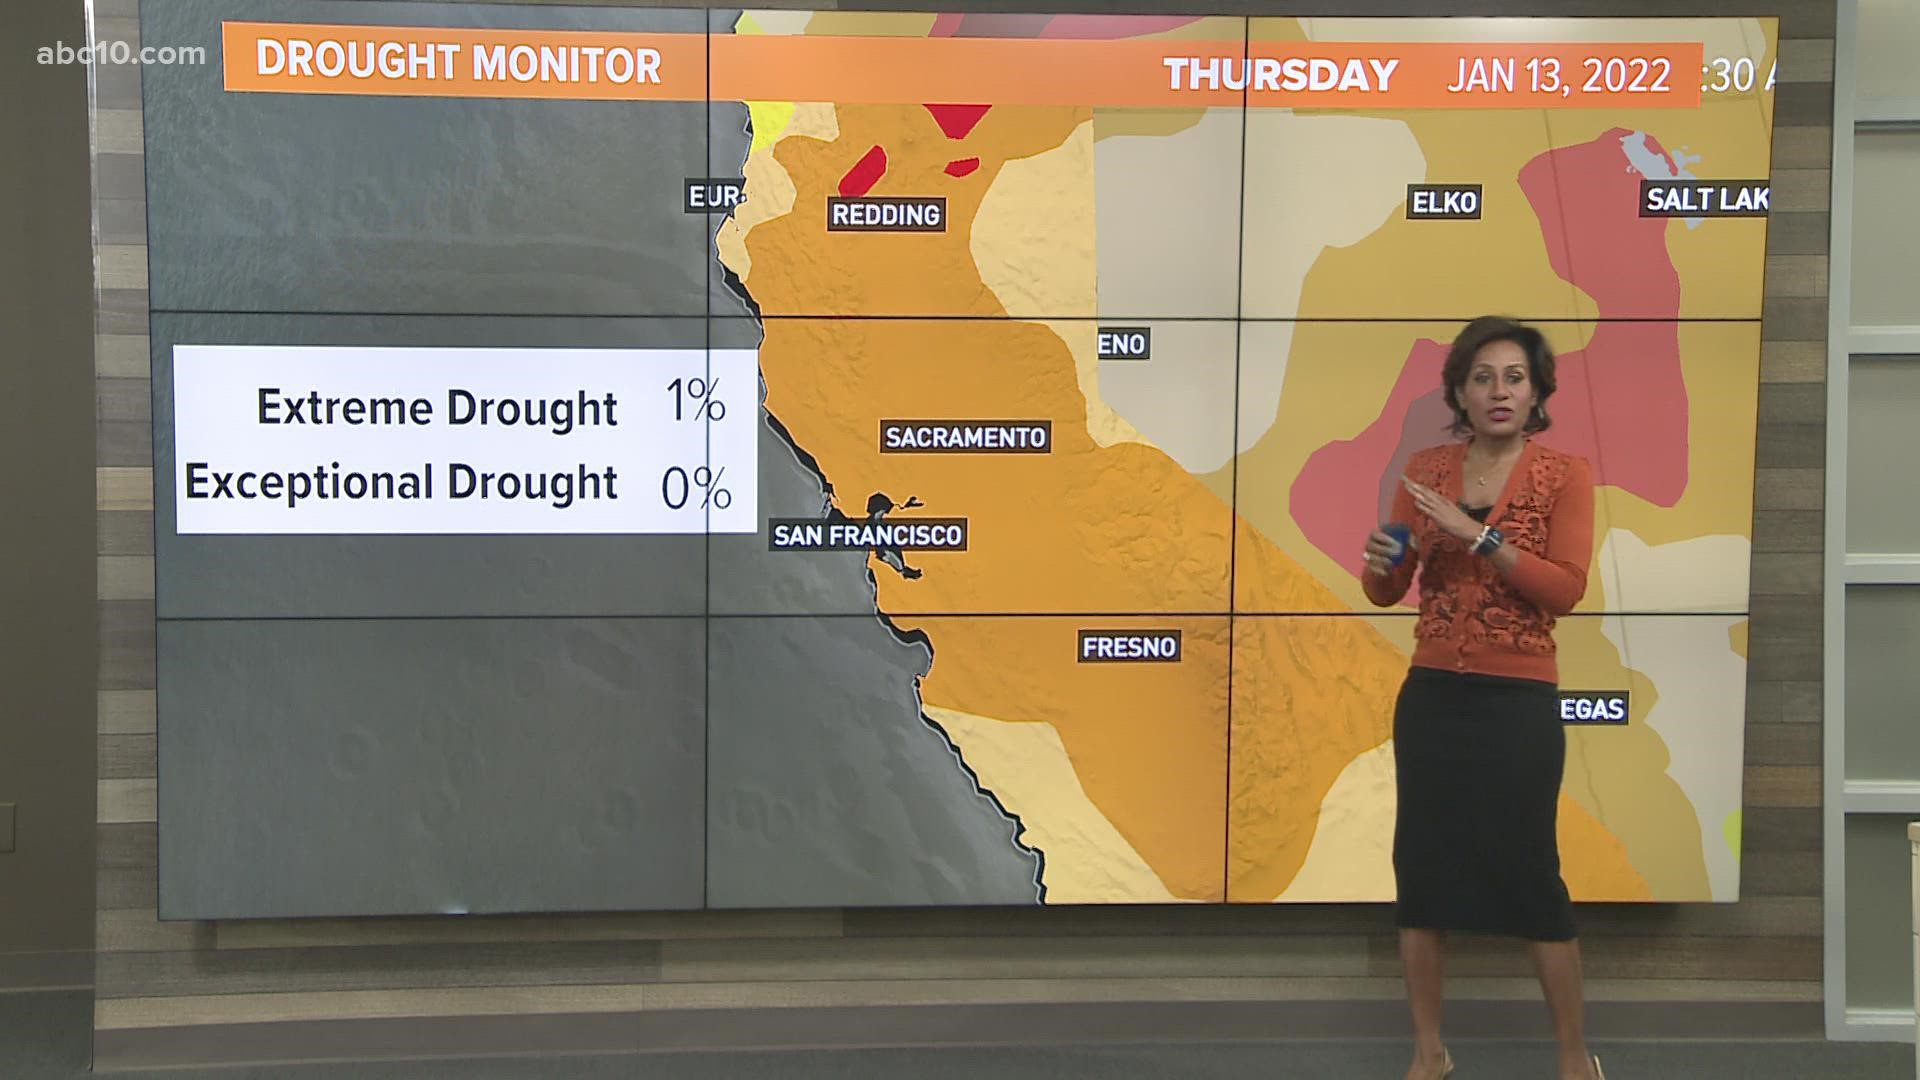 Drought conditions continue to improve for the Central Valley